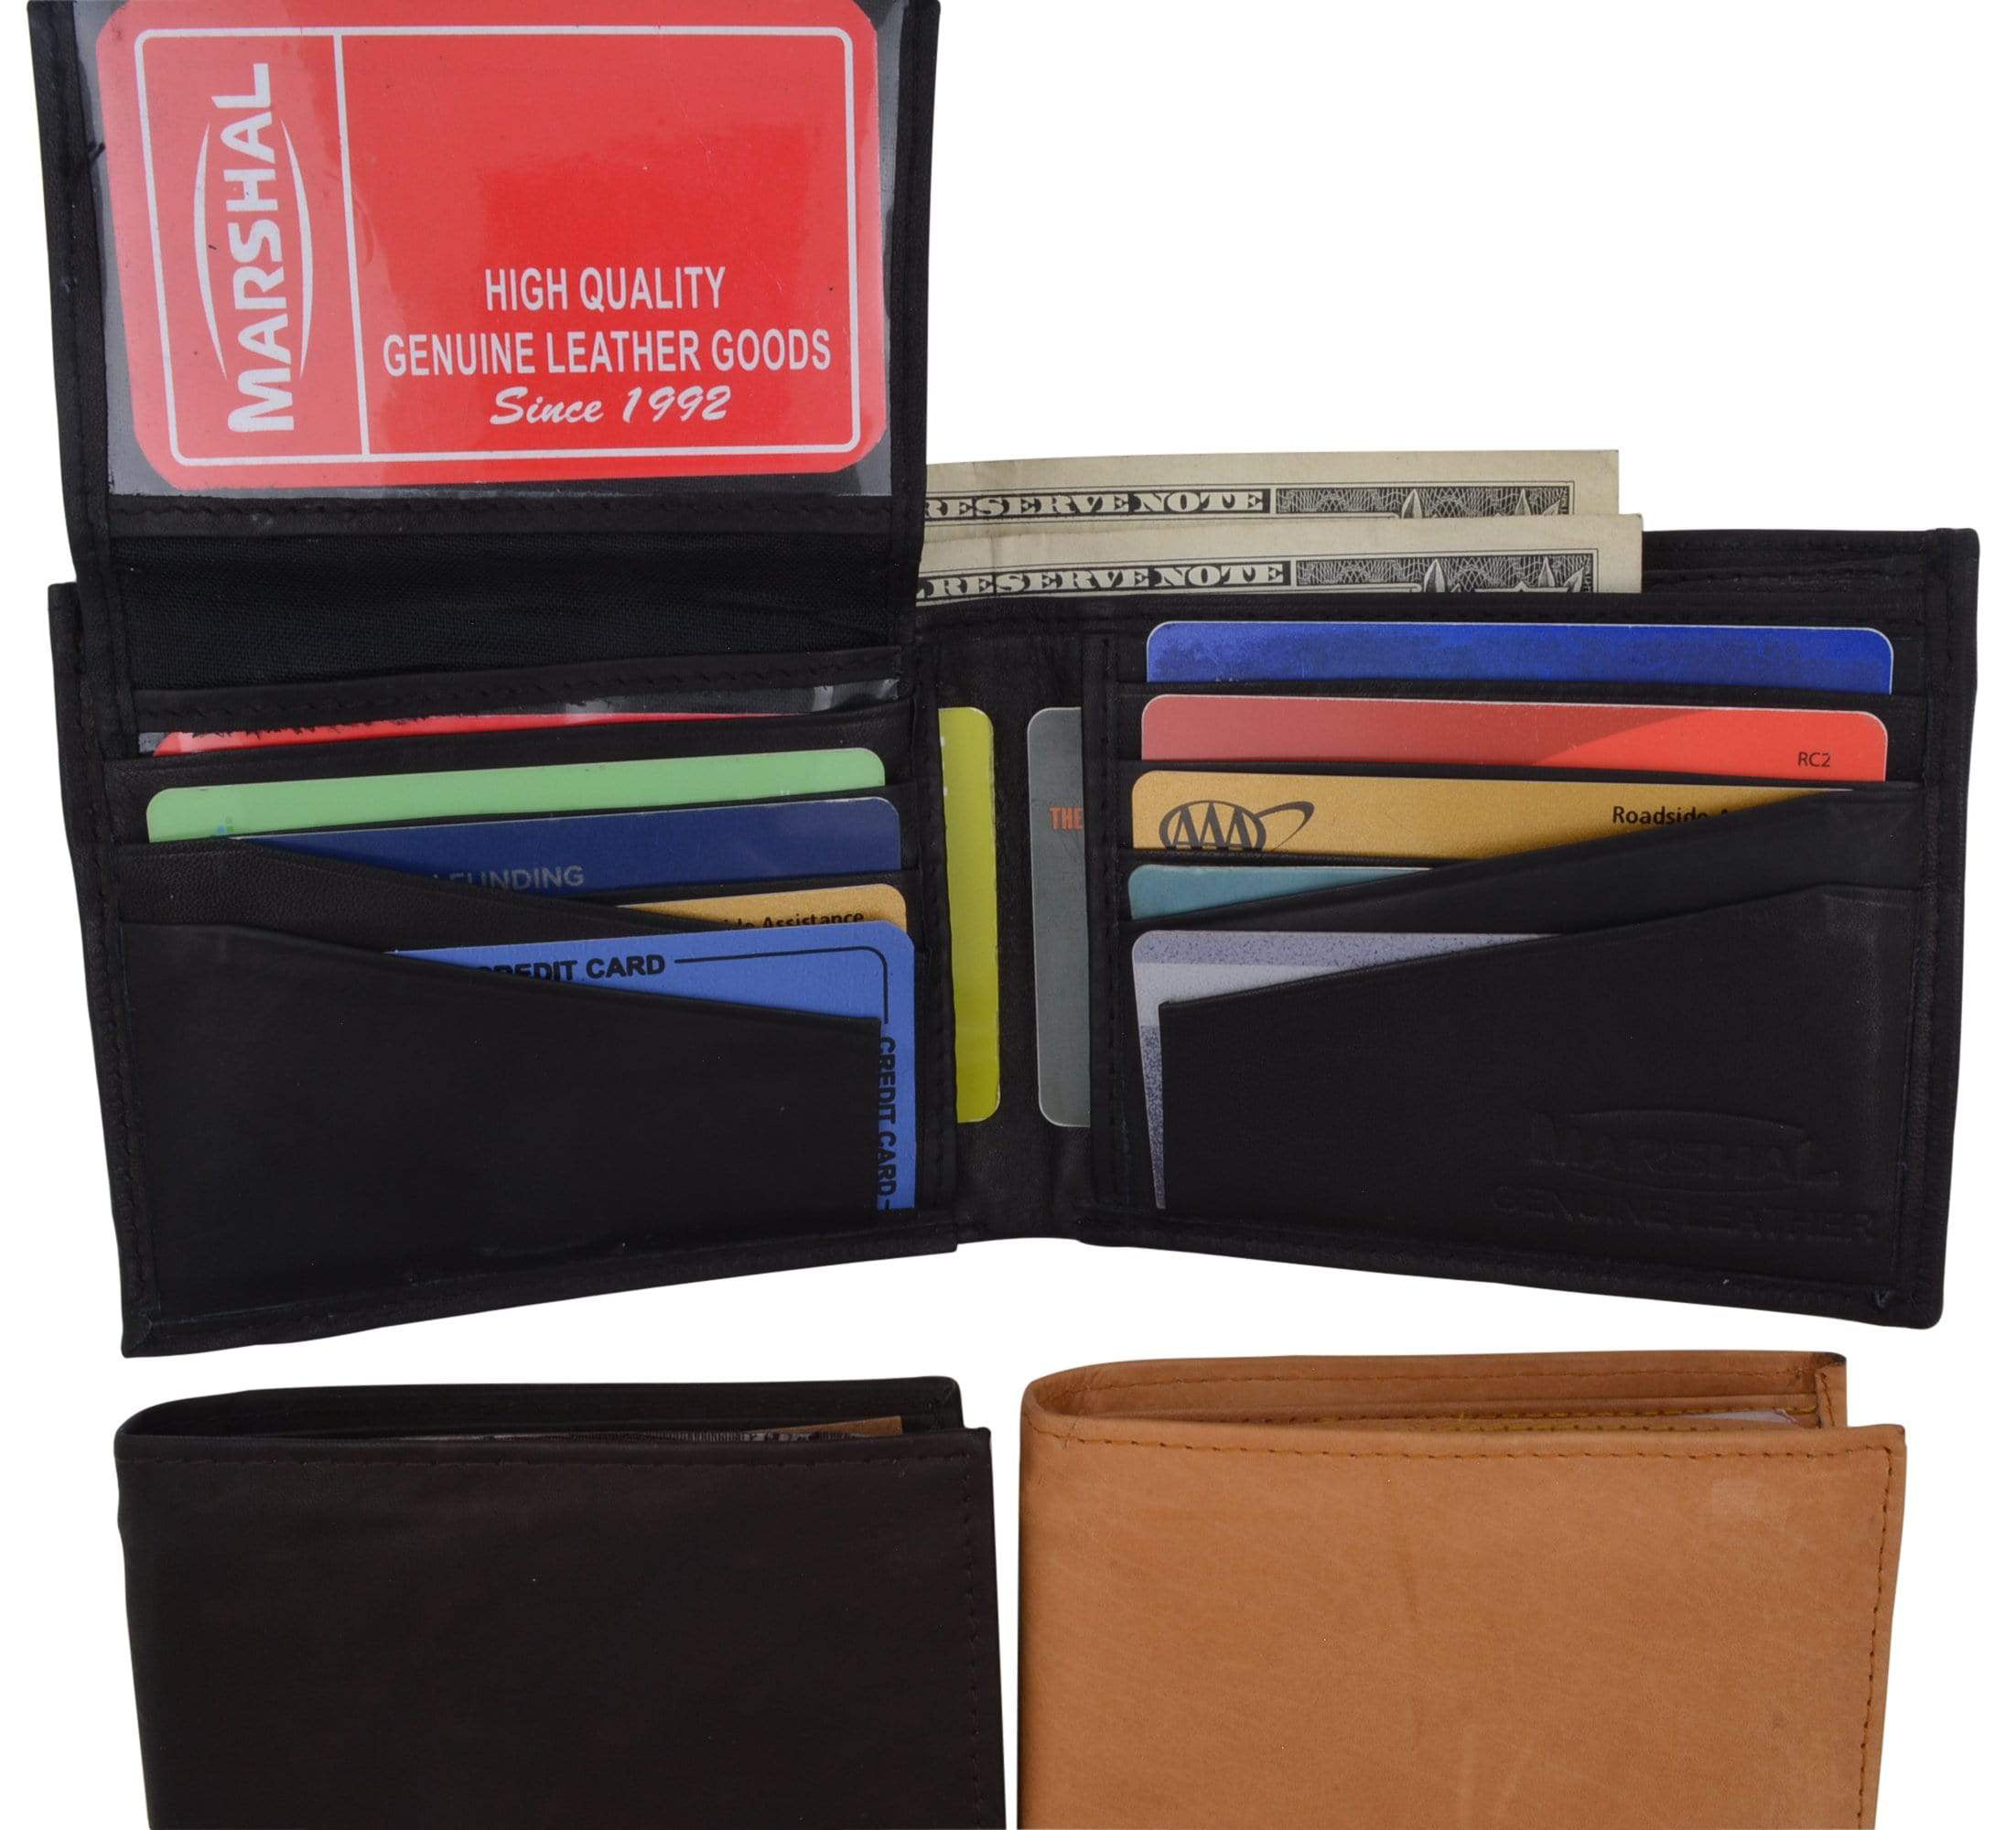 Men money bag, multi-functional ID bag, driver license, leather wallet and  leather wallet Figure 6665-1